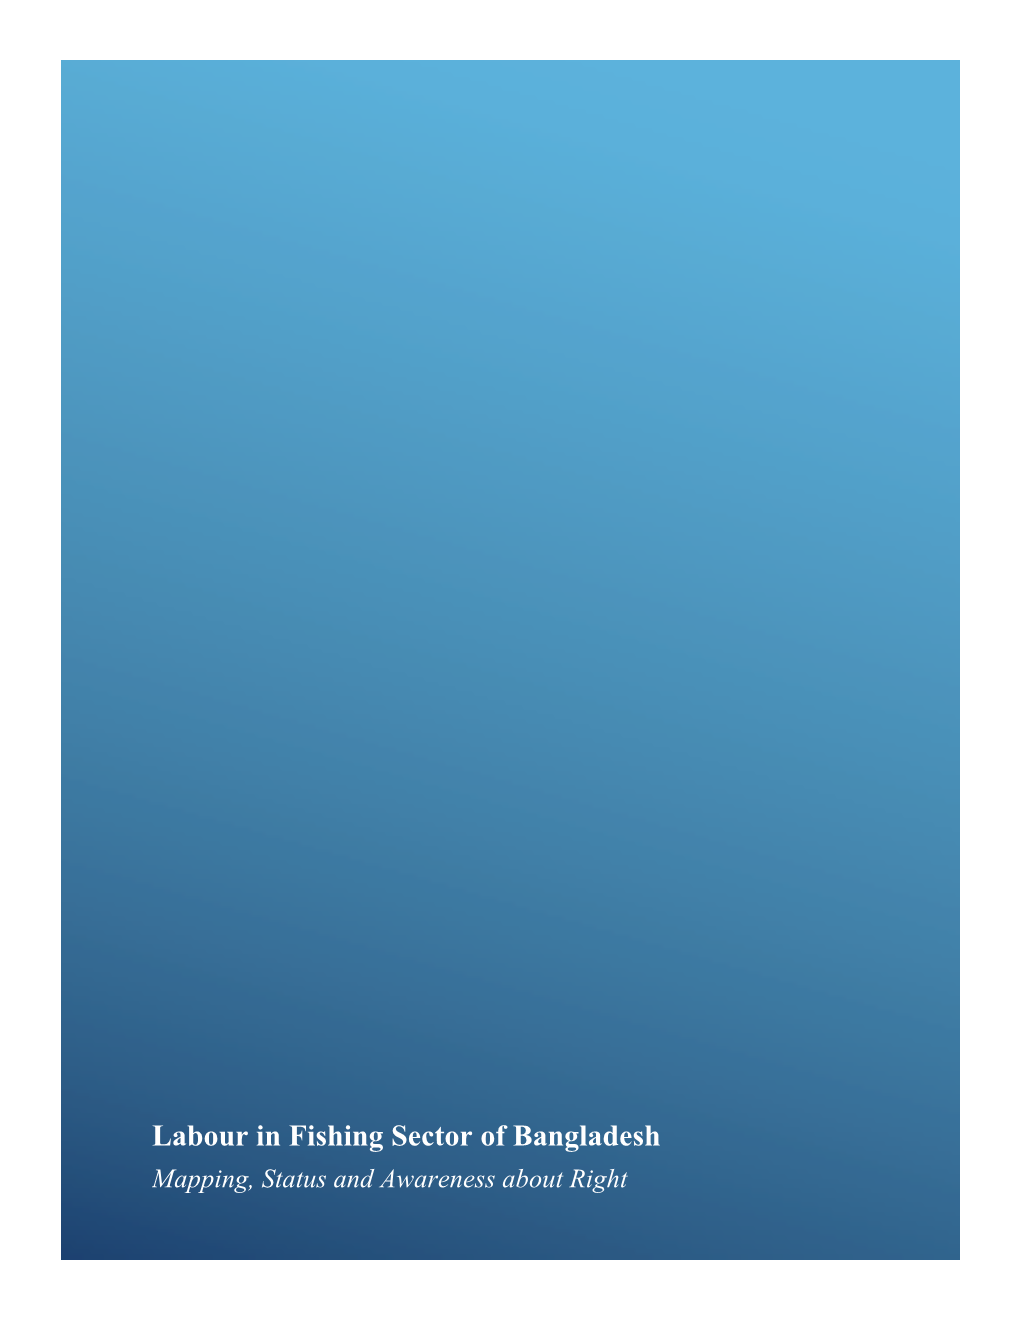 Labour in Fishing Sector of Bangladesh Mapping, Status and Awareness About Right